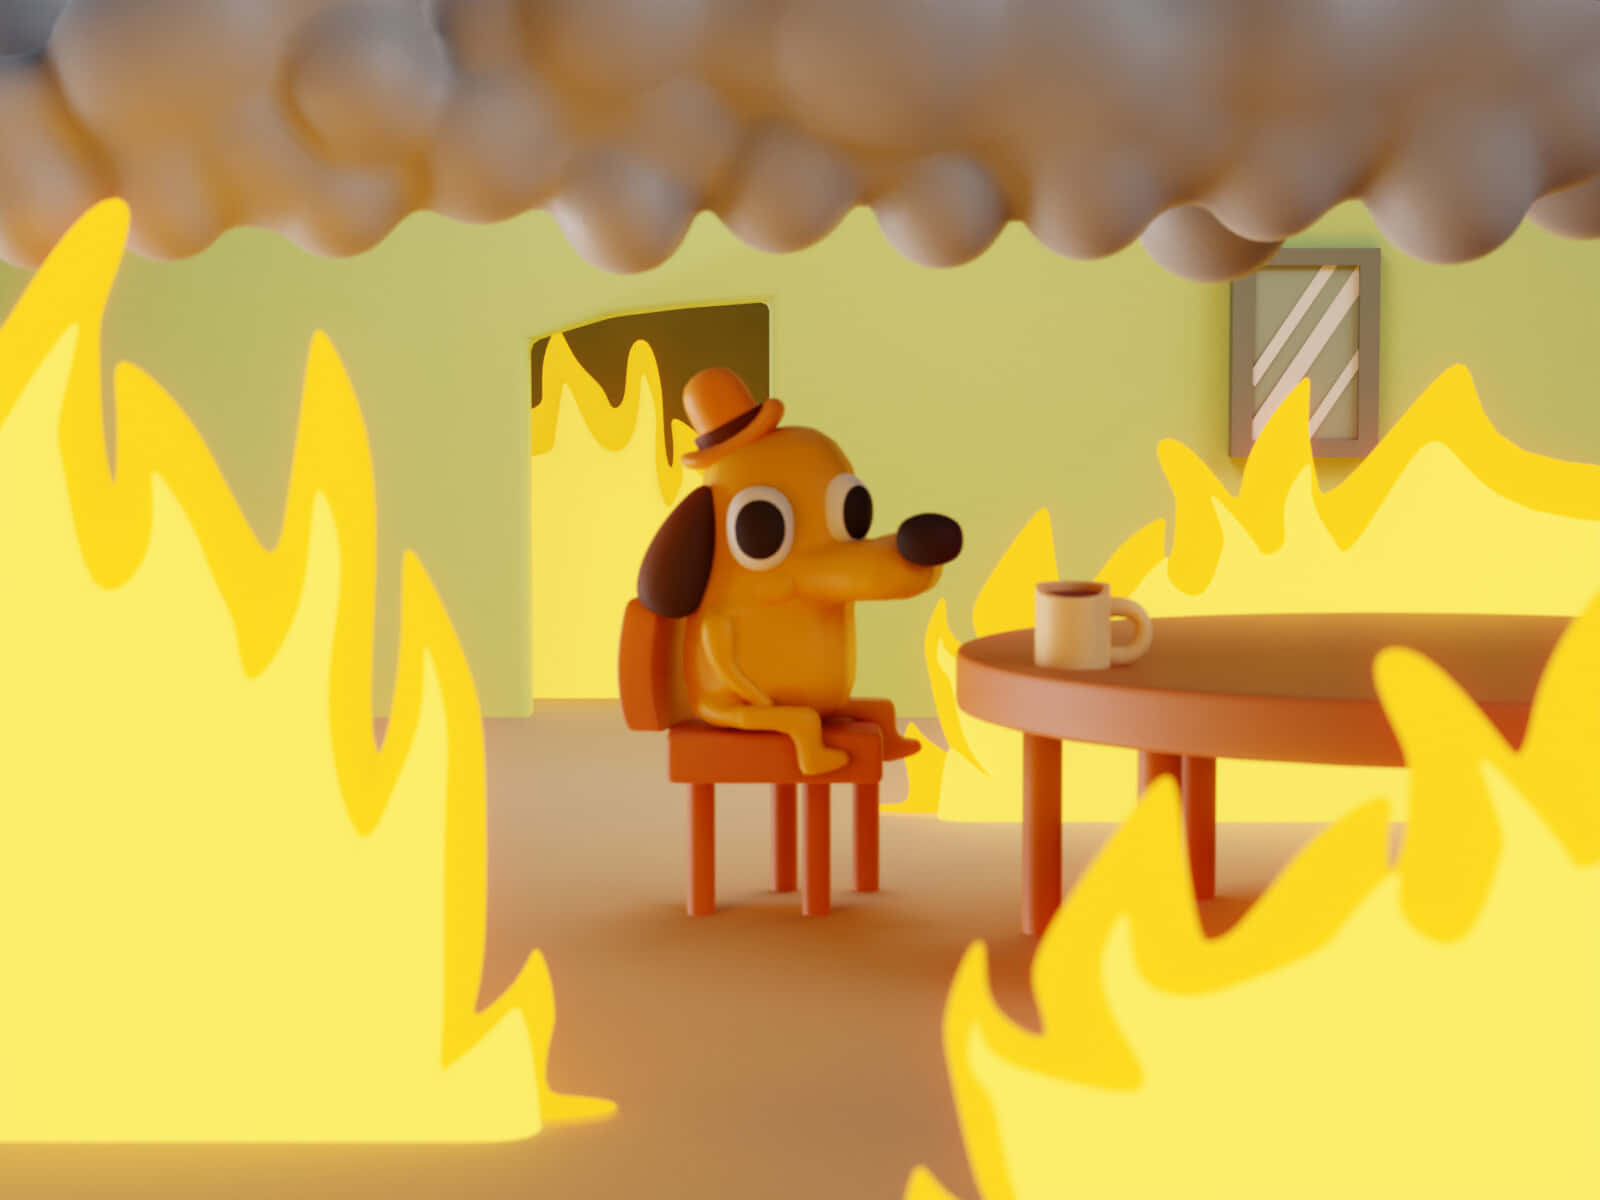 A Cartoon Dog Sitting At A Table With Fire In The Background